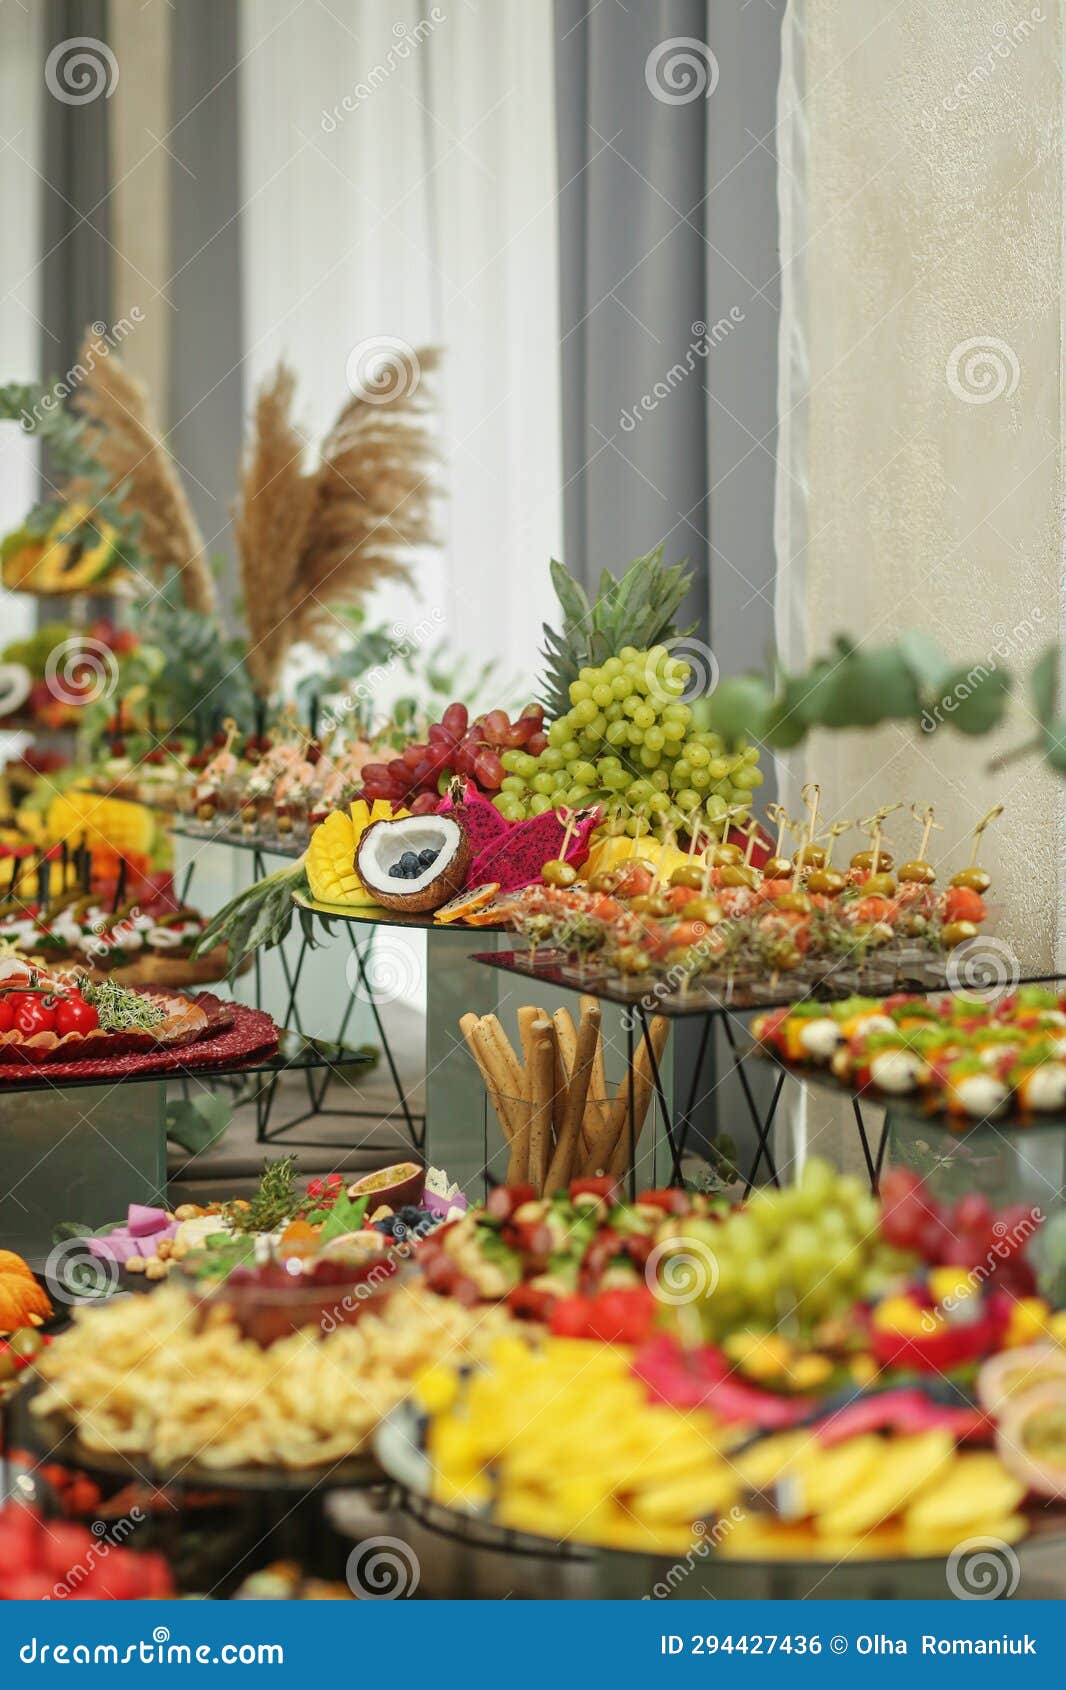 catering buffet table with snacks and appetizers. set of varios fruits and berries. decorative vase